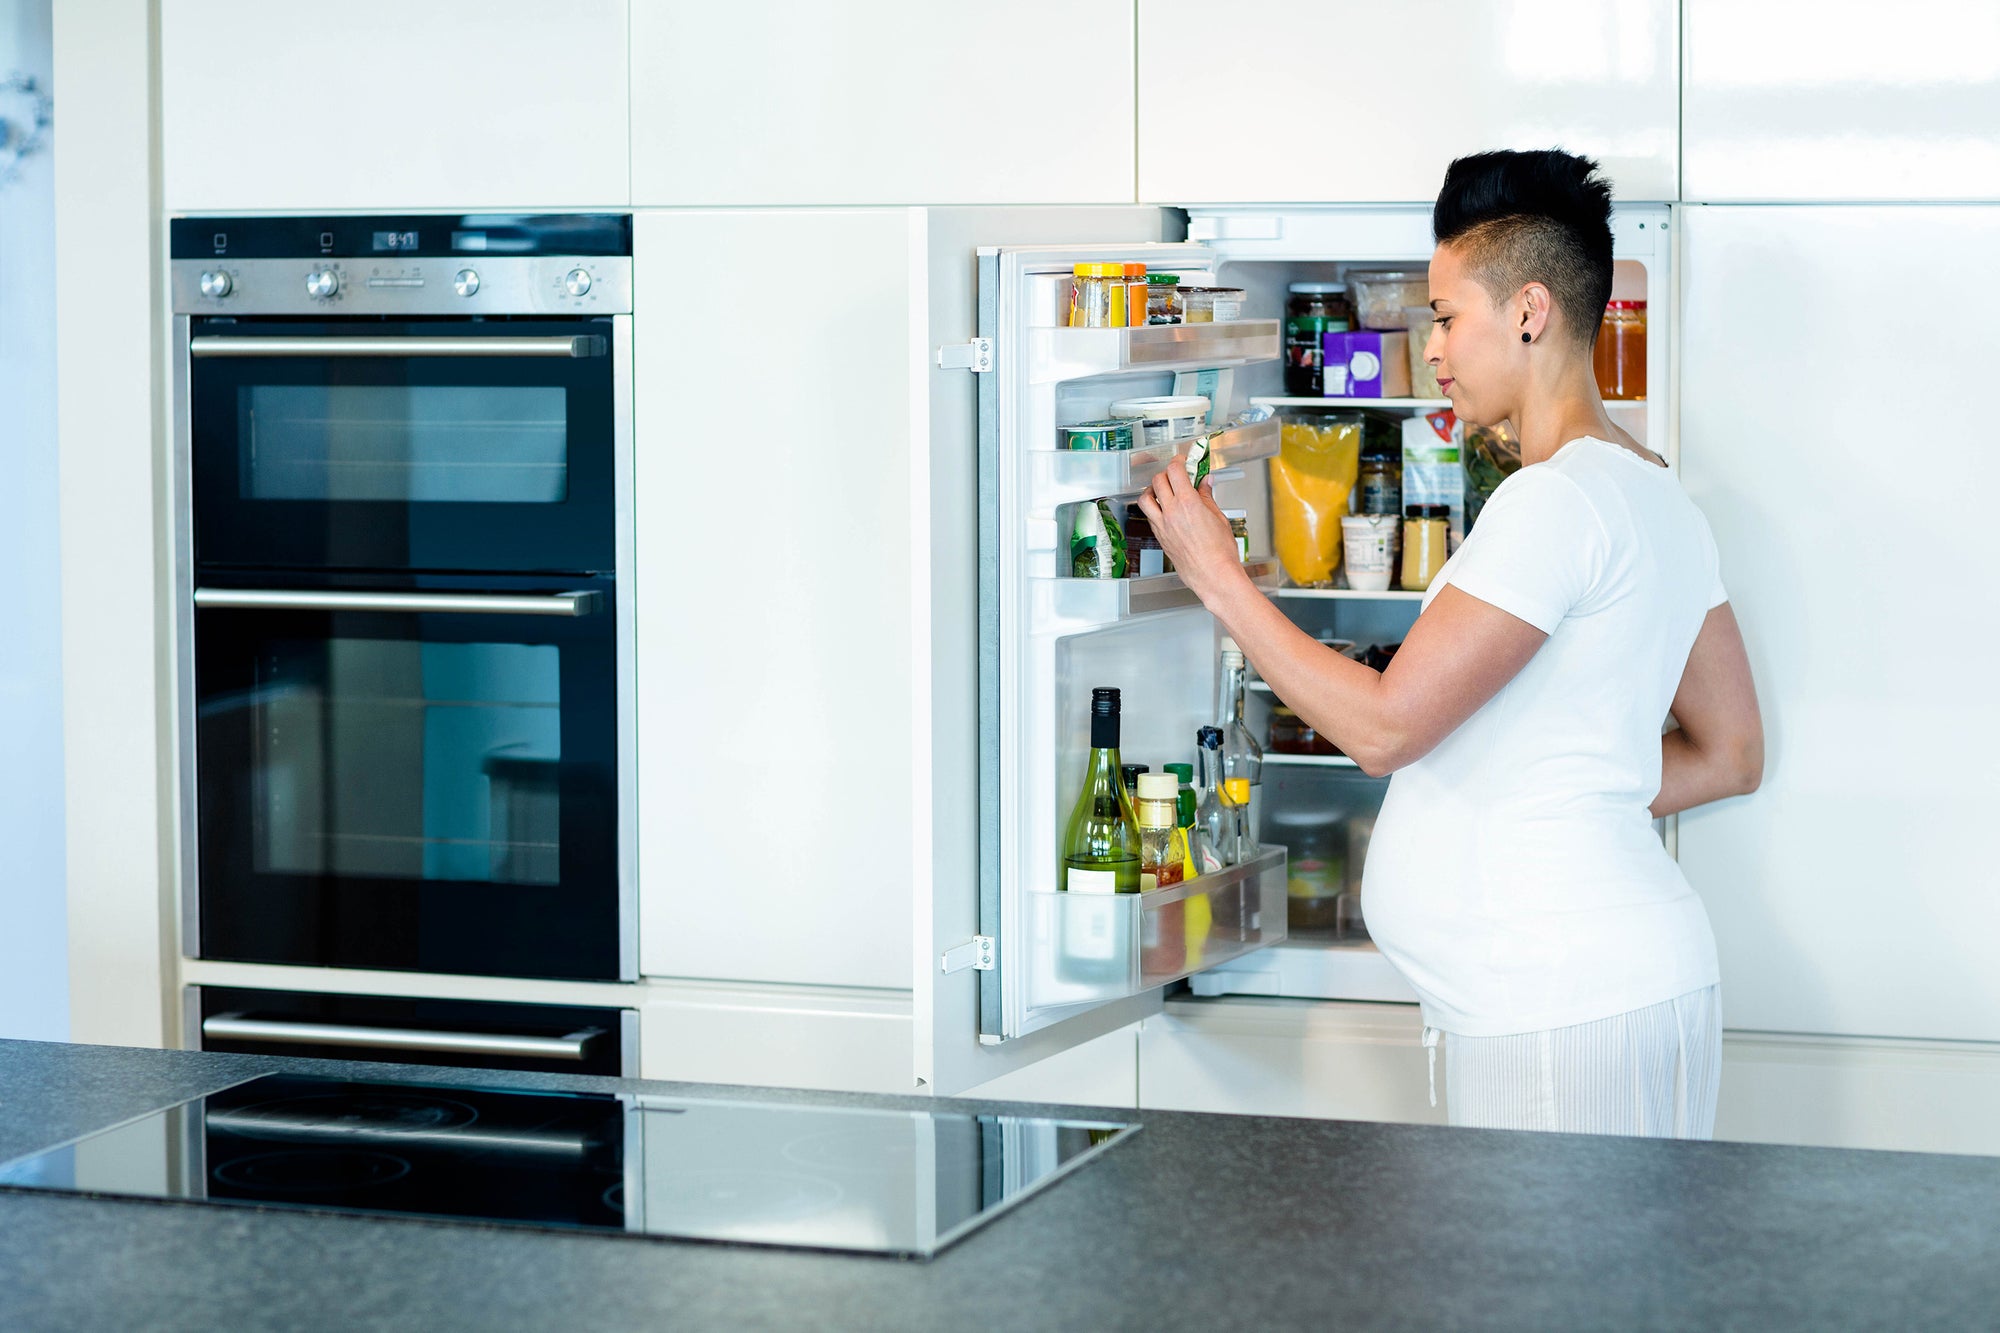 Pregnant woman looking in the refrigerator. Safety First: hidden toxins to avoid during pregnancy